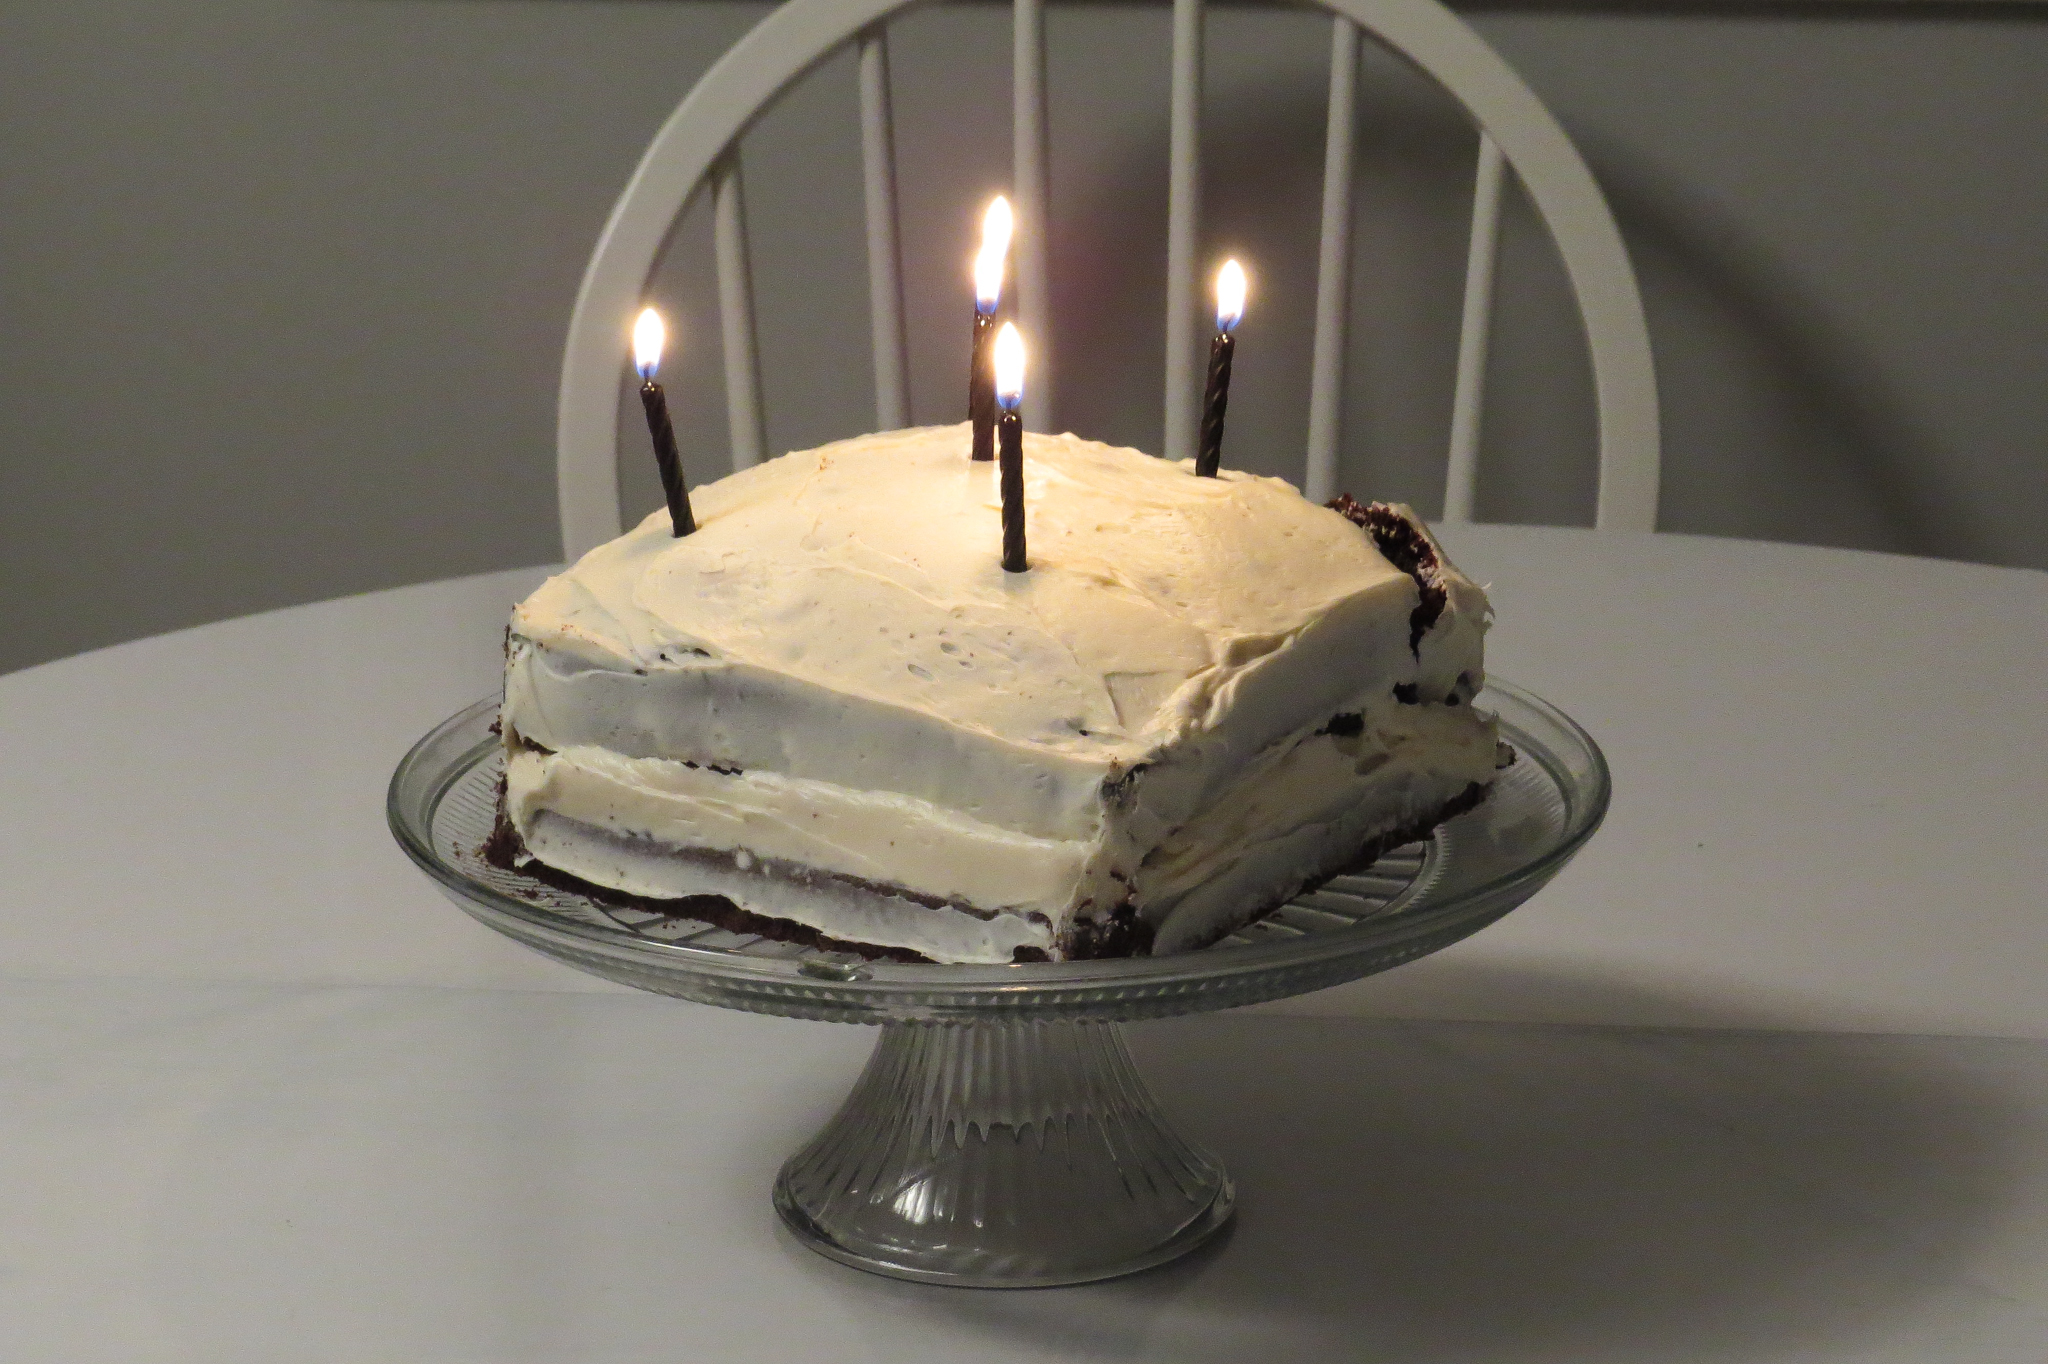 an image of a cake on a table with three lit candles